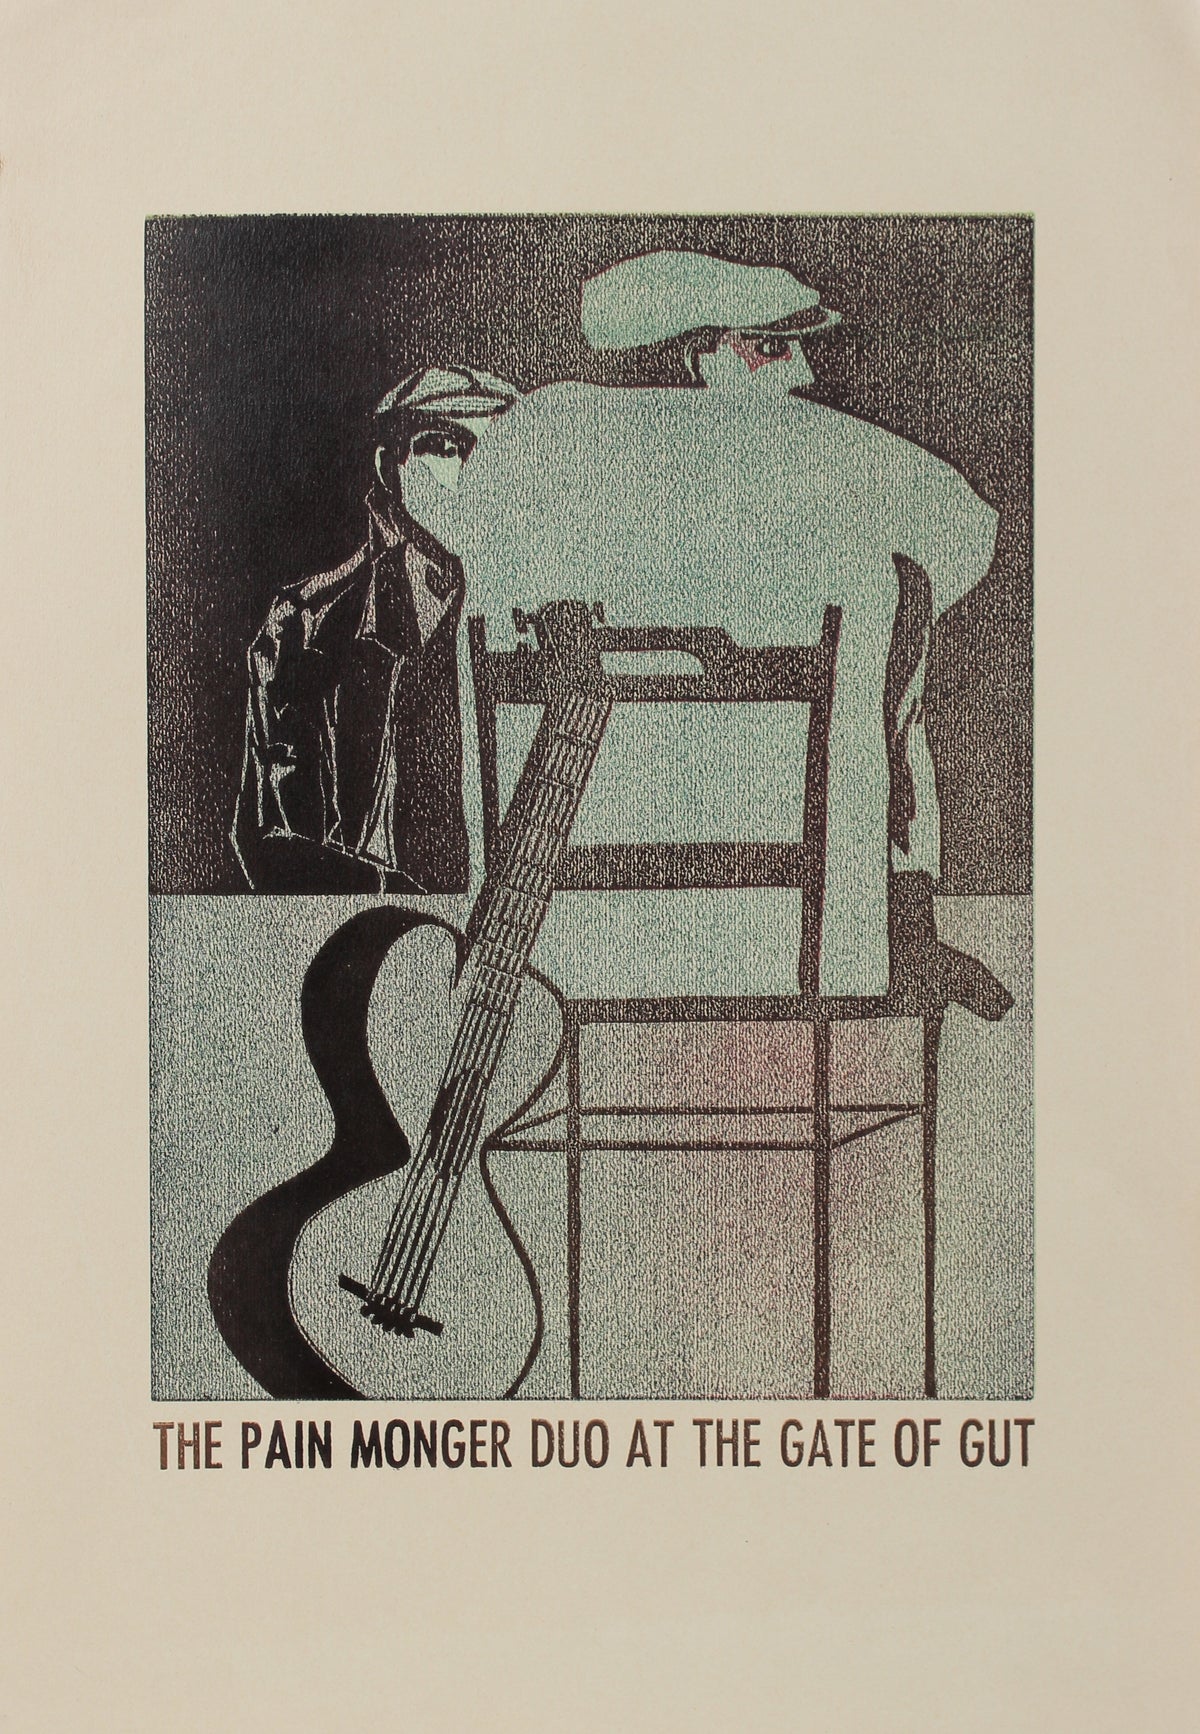 &lt;i&gt;The Pain Monger Duo at the Gate of Gut&lt;/i&gt;&lt;br&gt;1960-70s Serigraph&lt;br&gt;&lt;br&gt;#A0437